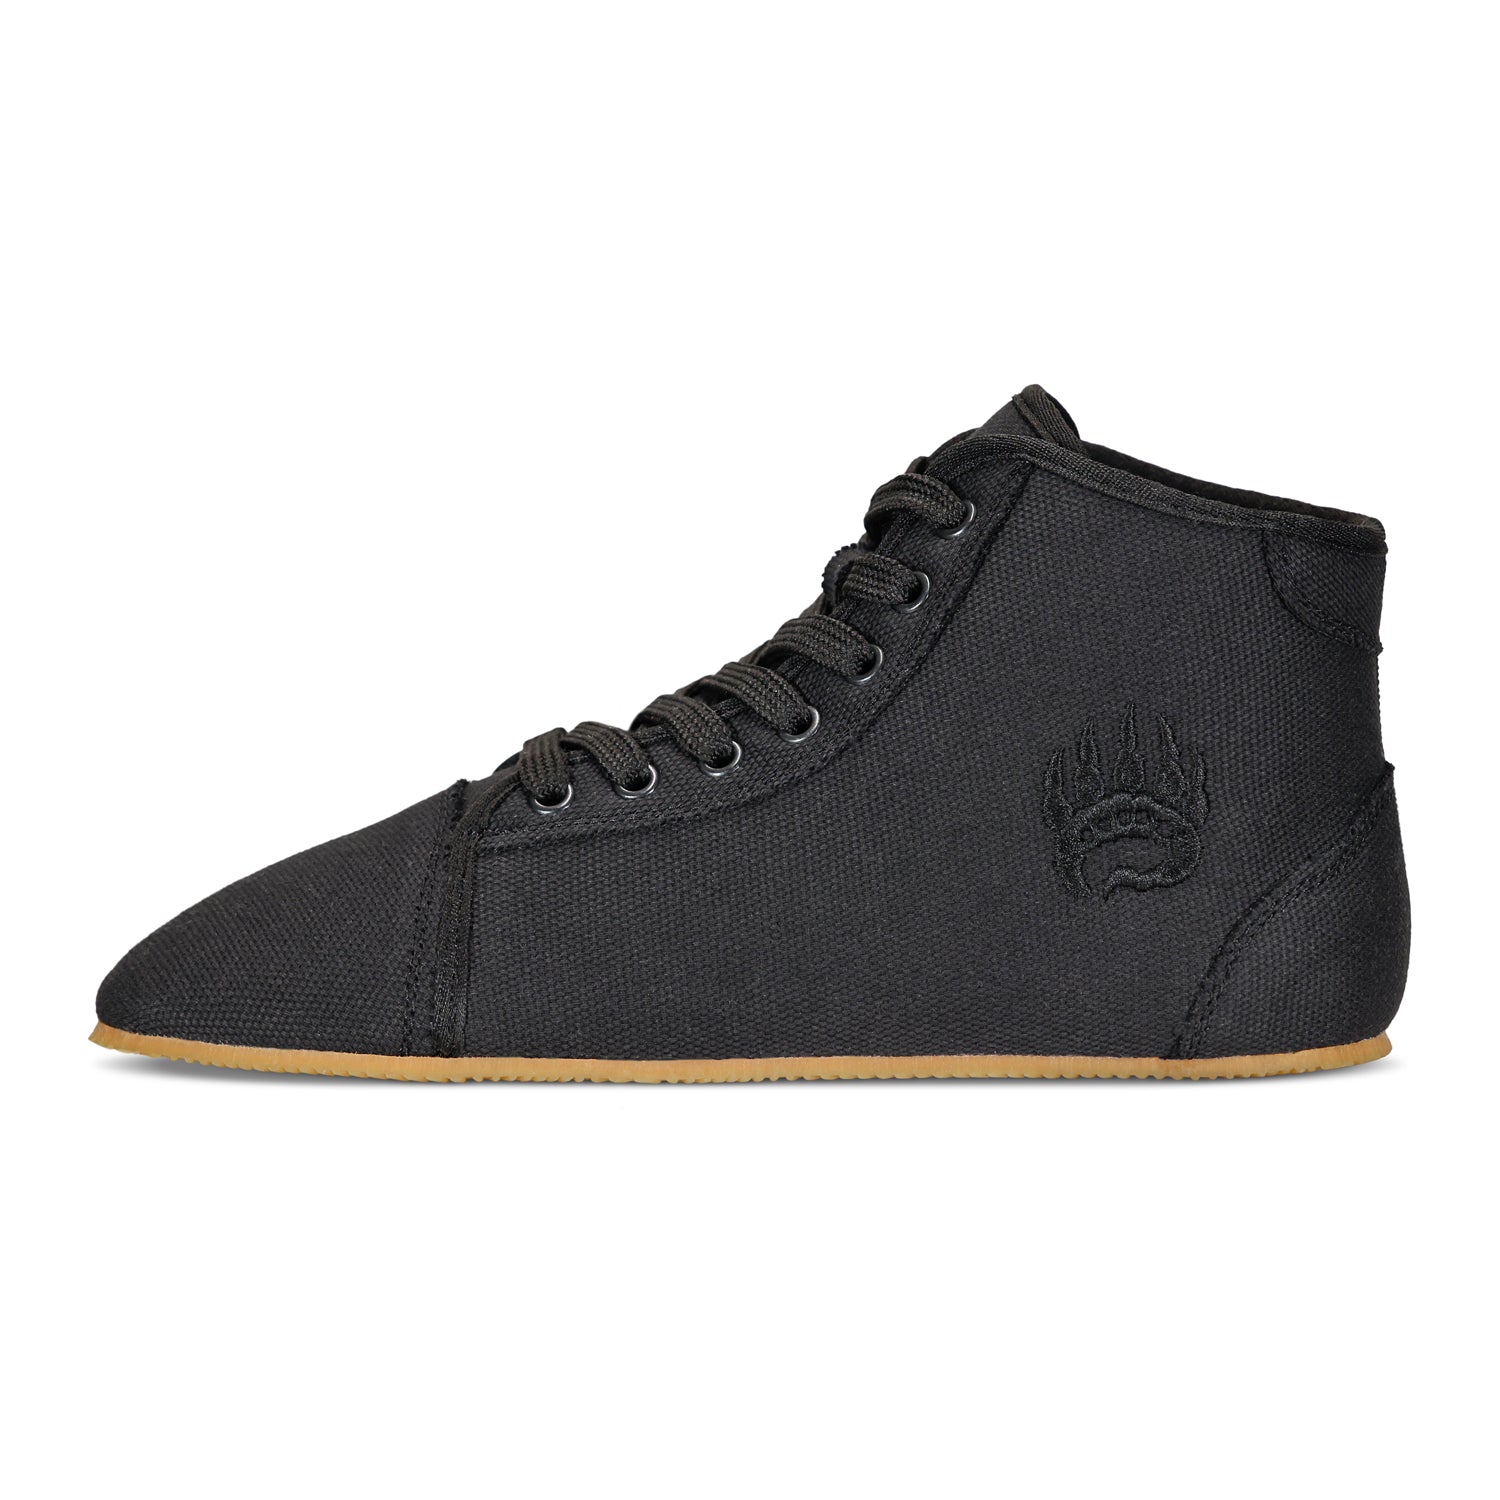 A single Bearfoot Ursus Canvas high-top training sneaker with laces, featuring a small emblem on the side, ideal for strength athletes.